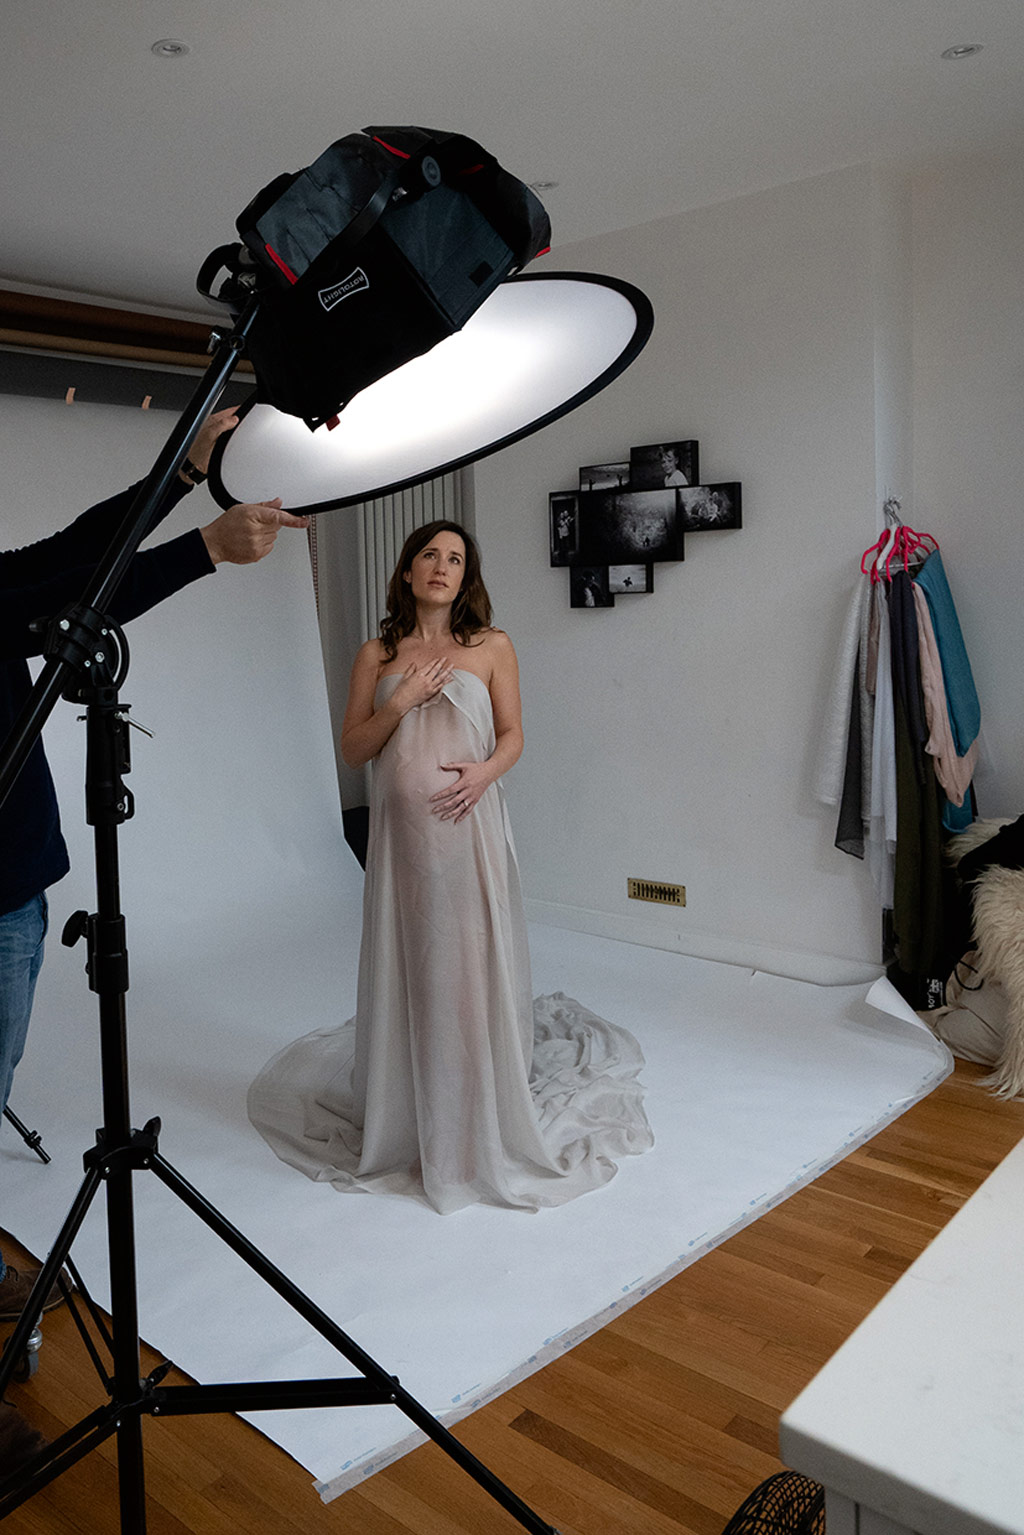 Maternity photography lighting tips, how to pose a model